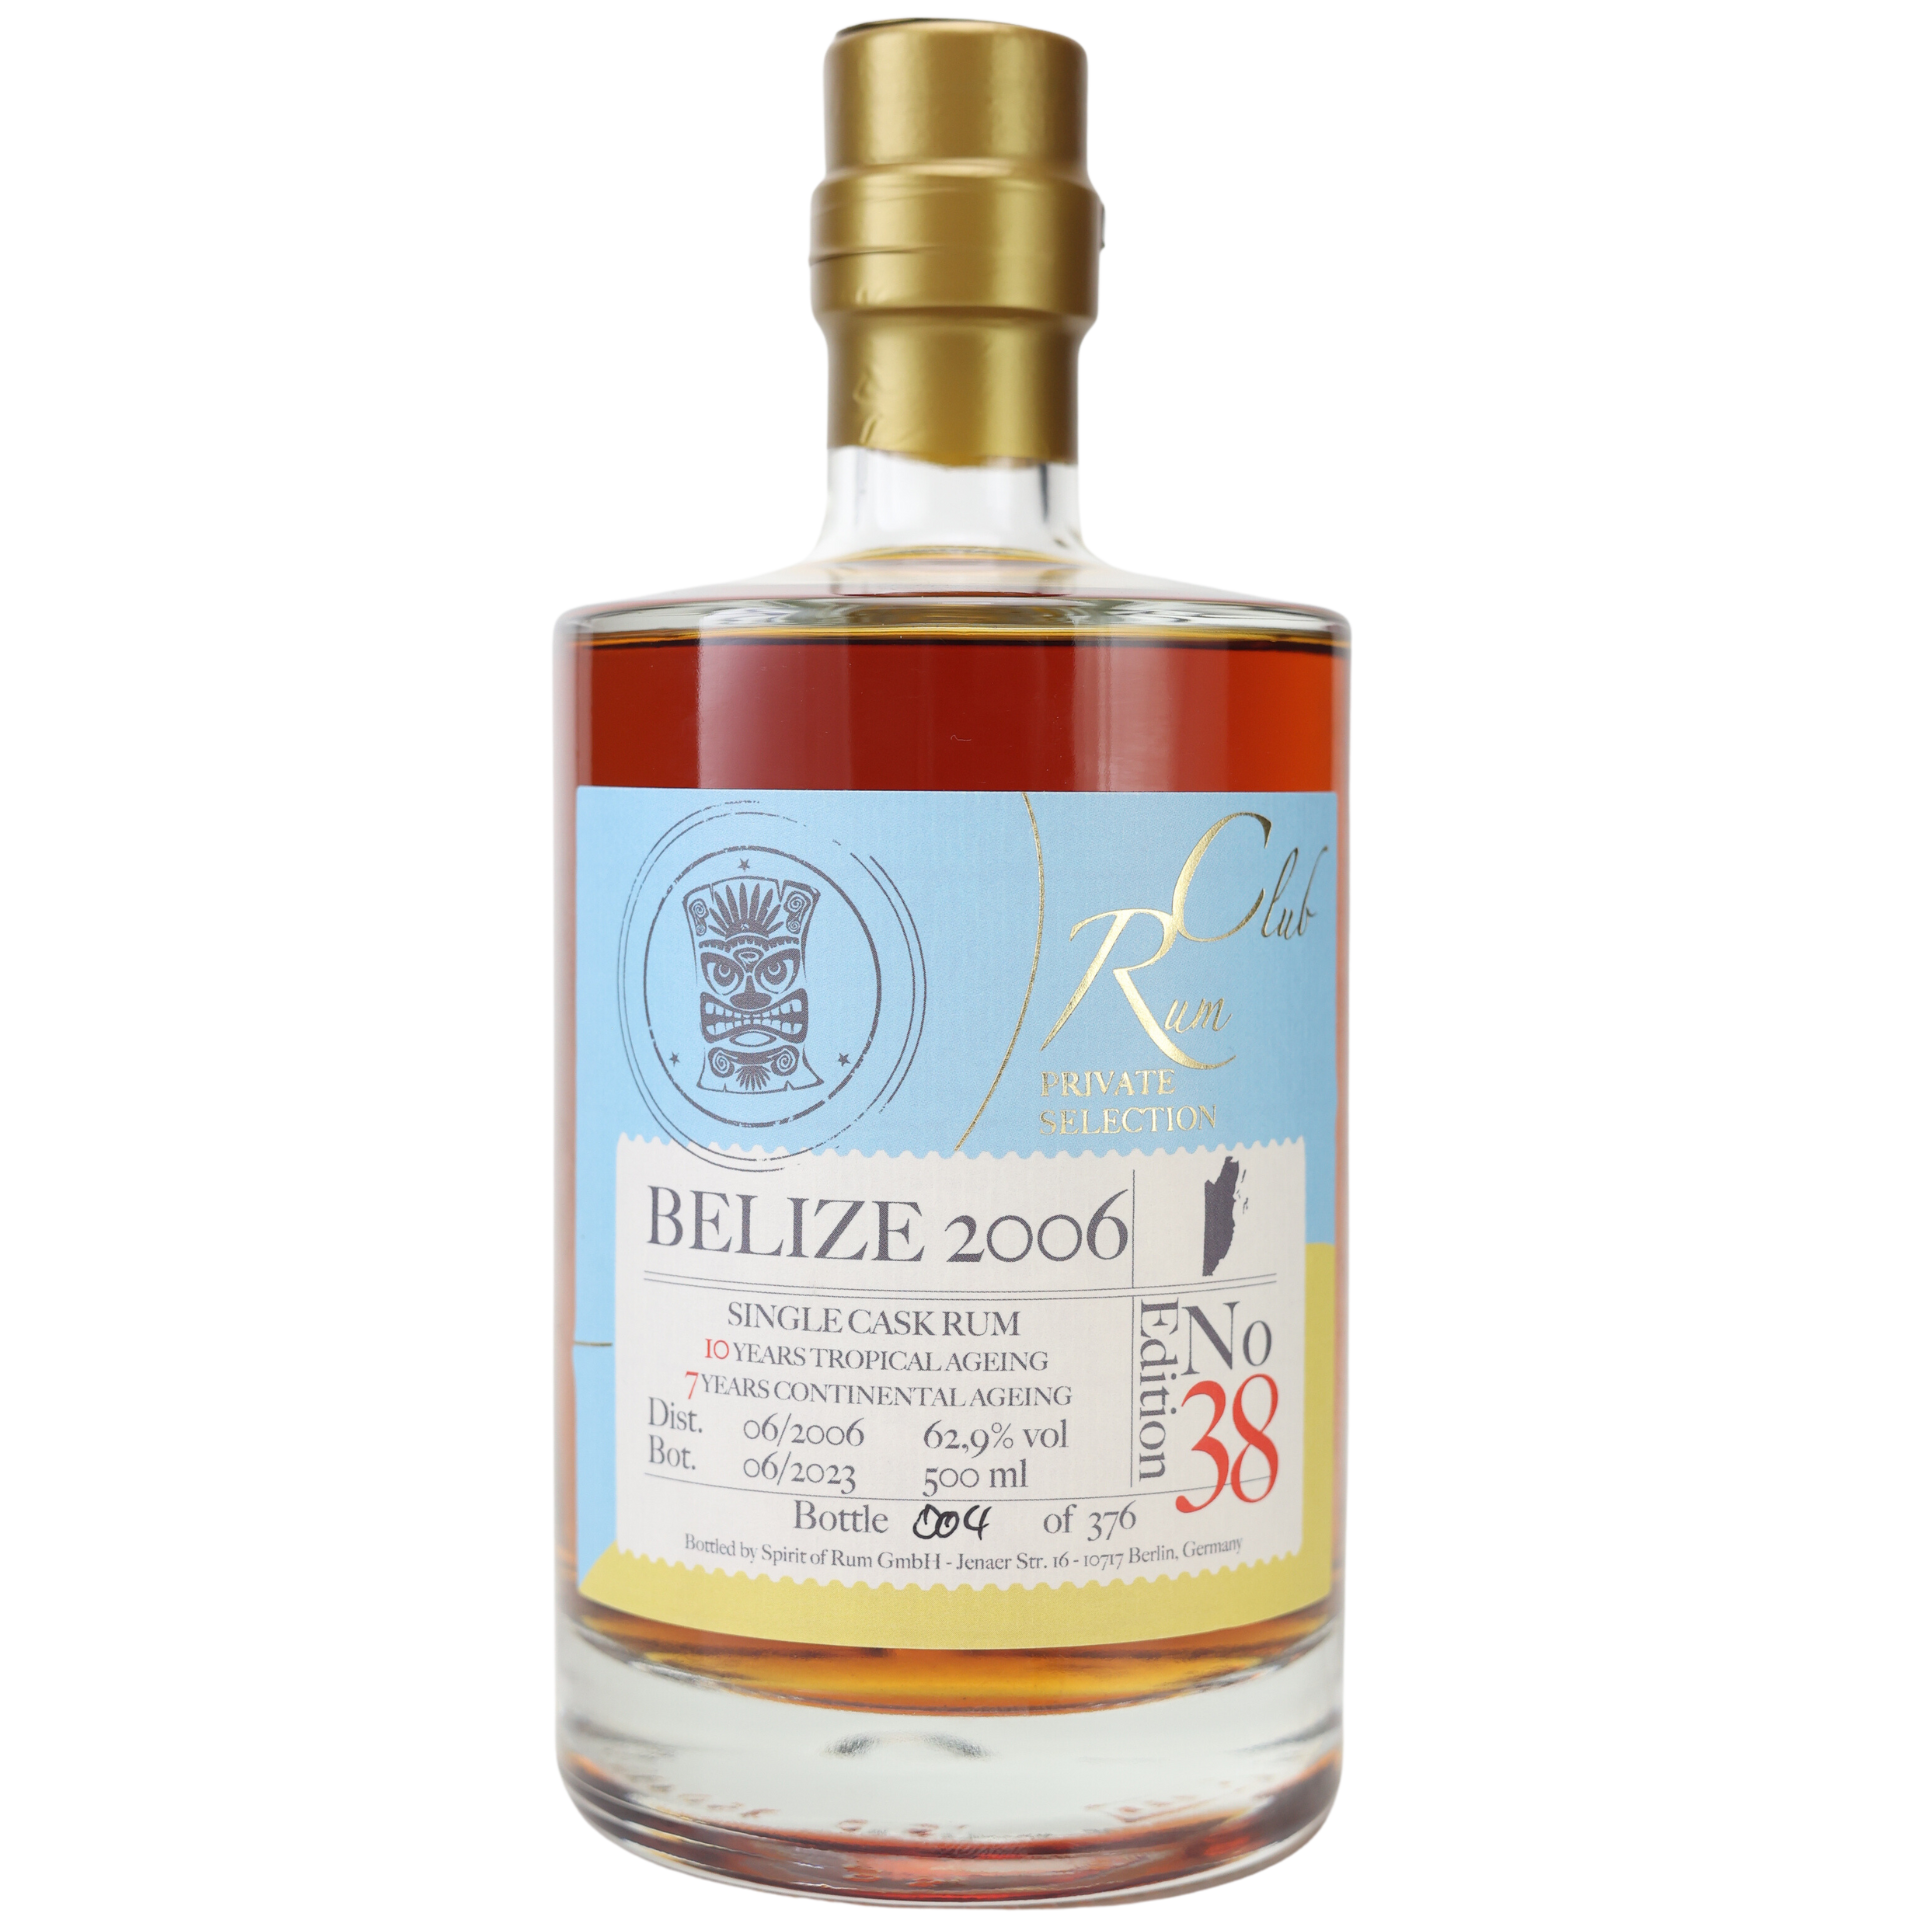 Rumclub Private Selection Ed.38 Belize 2006 Rum 62,9% 0,5l